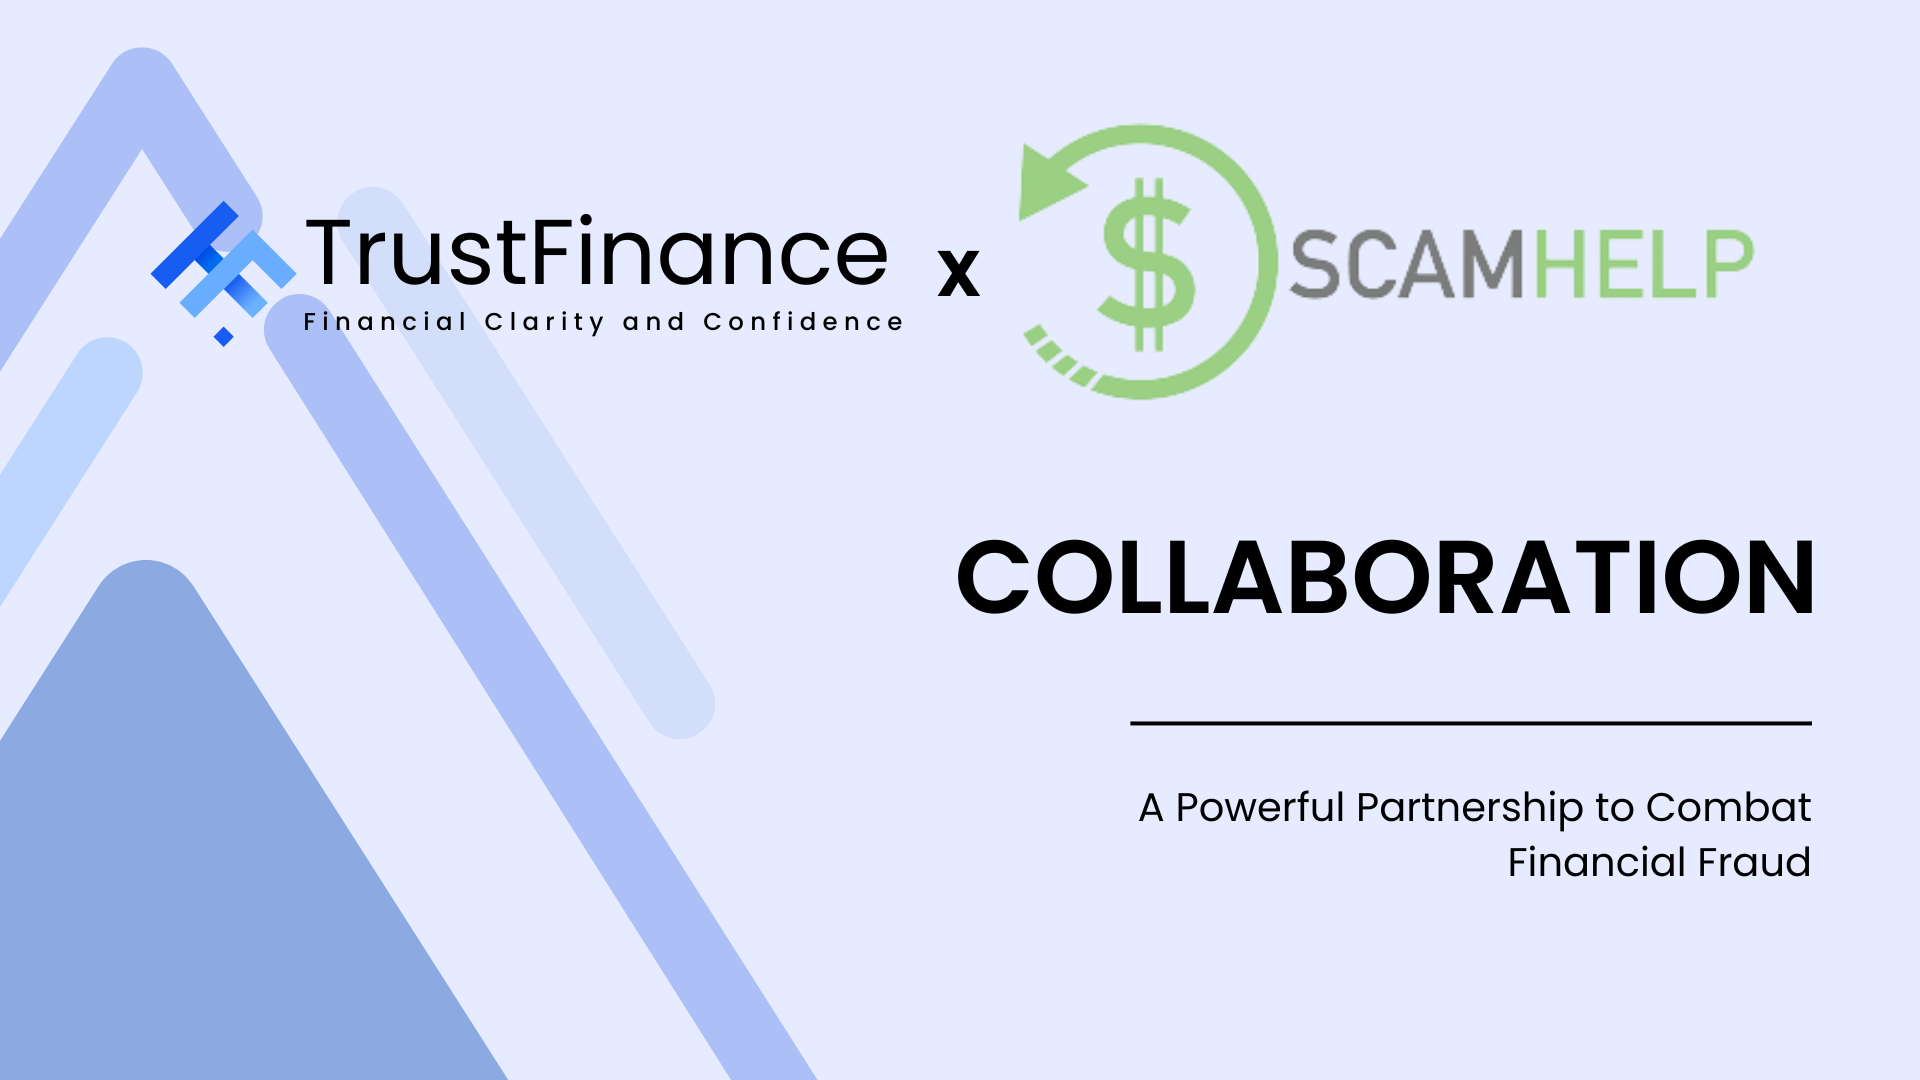 TrustFinance and ScamHelp Unite to Empower Users in the Fight Against Financial Fraud